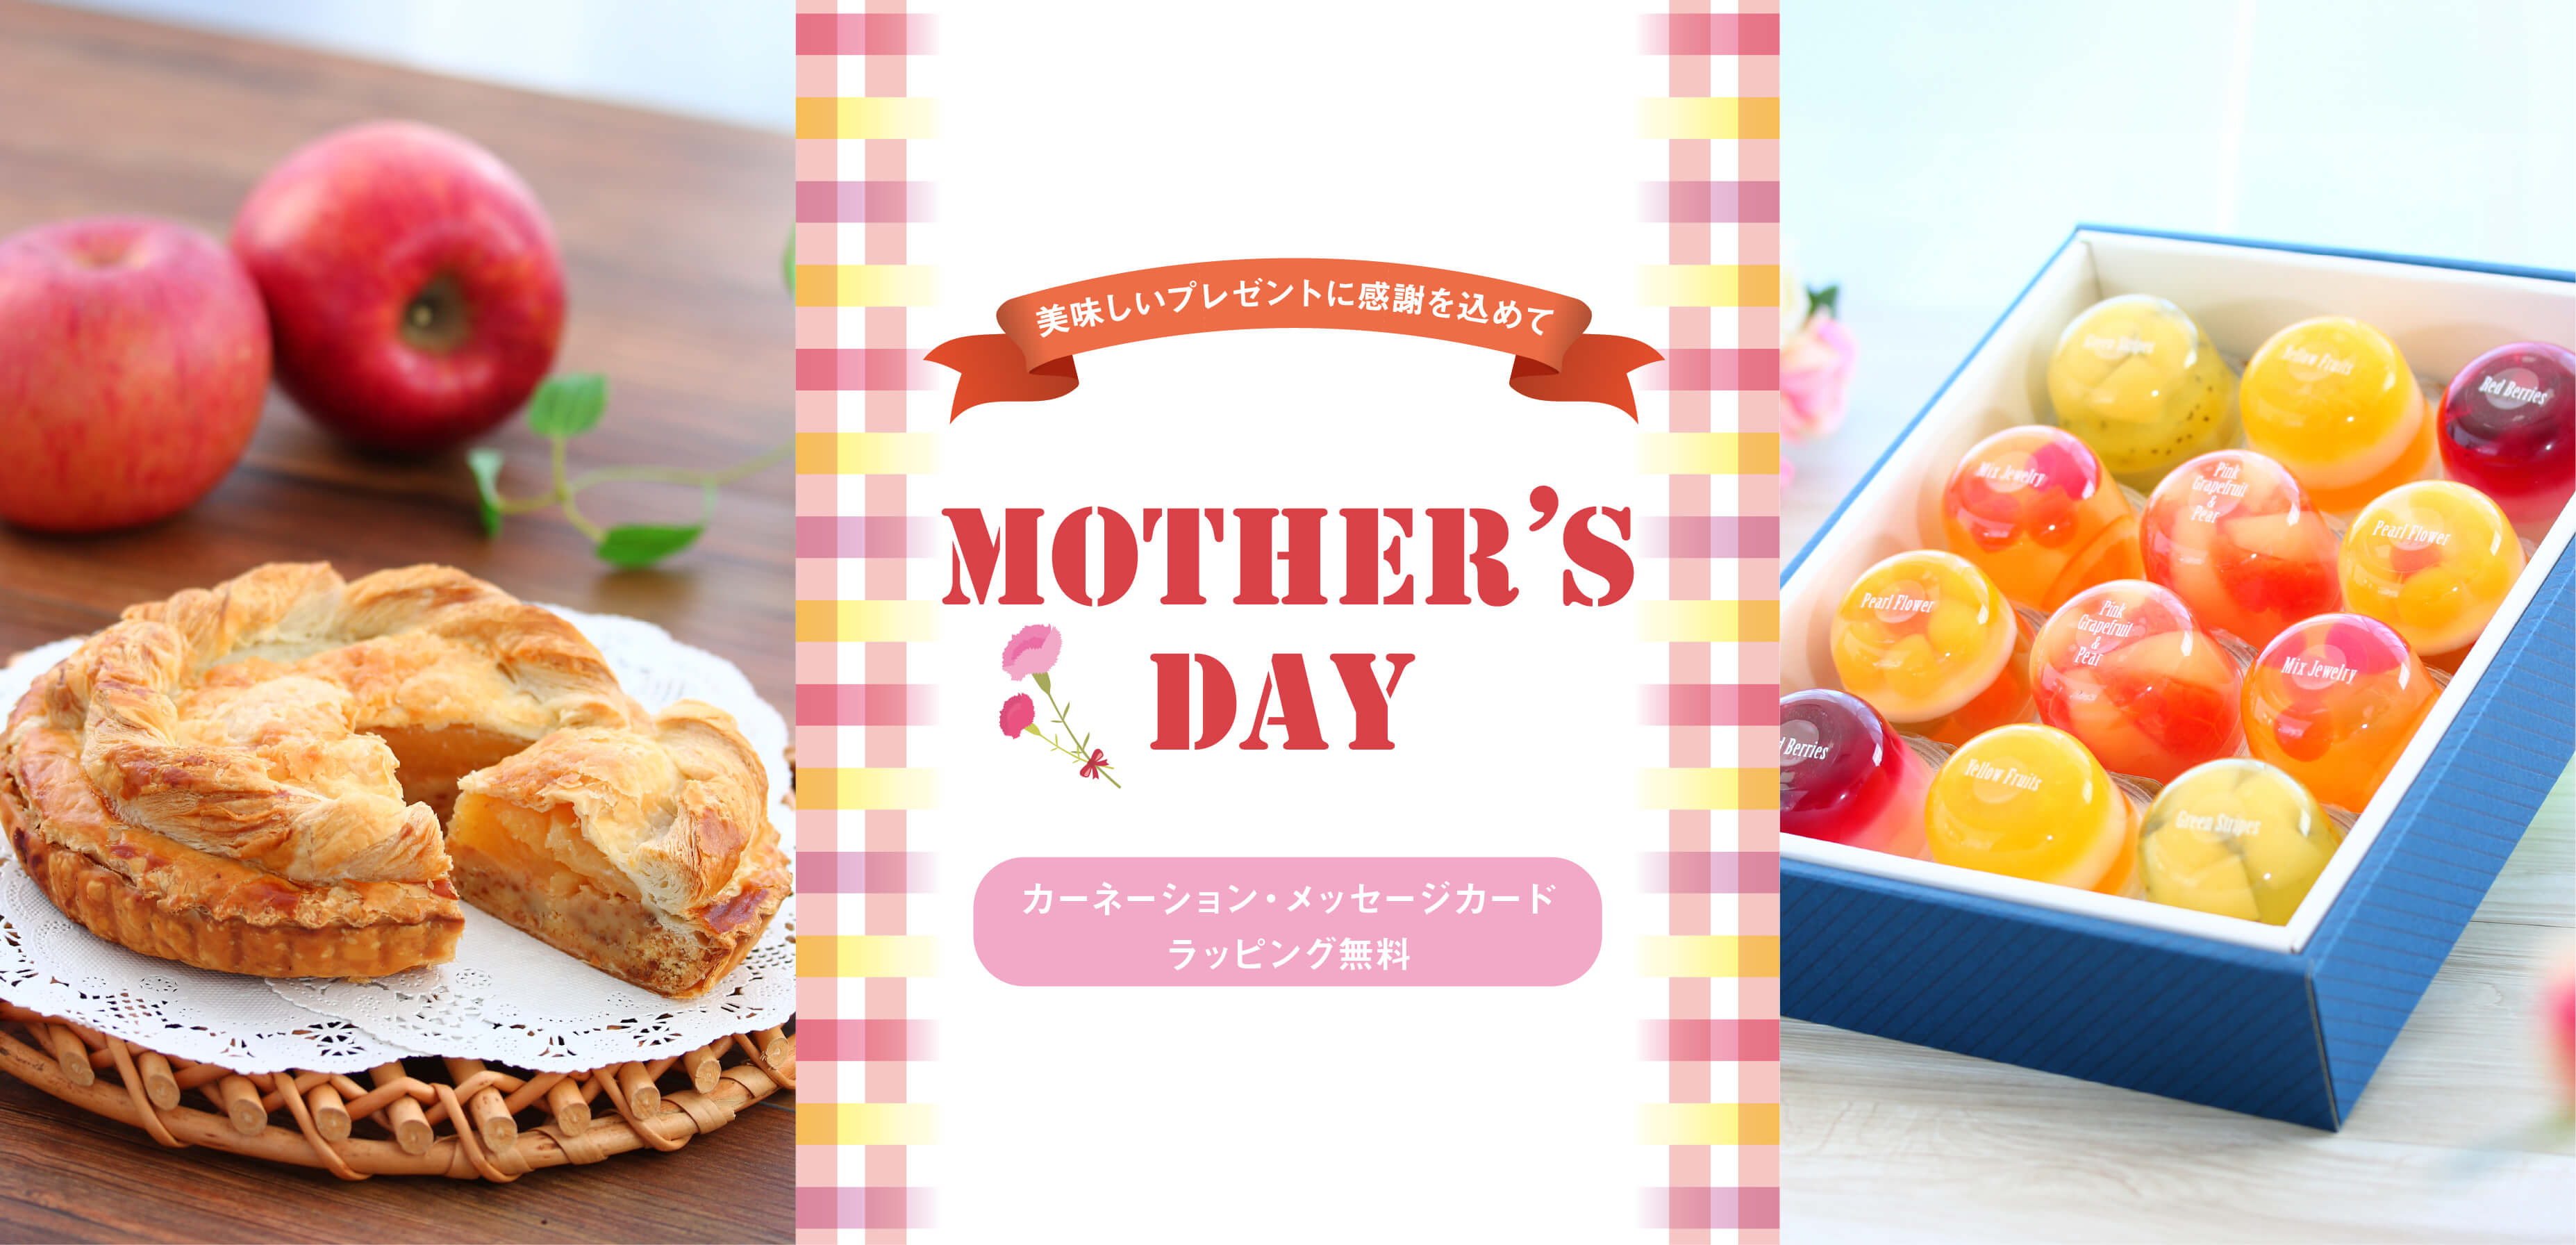 Happy Mother's Day!軽井沢ファーマーズギフトの母の日プレゼント・ギフト2024年。